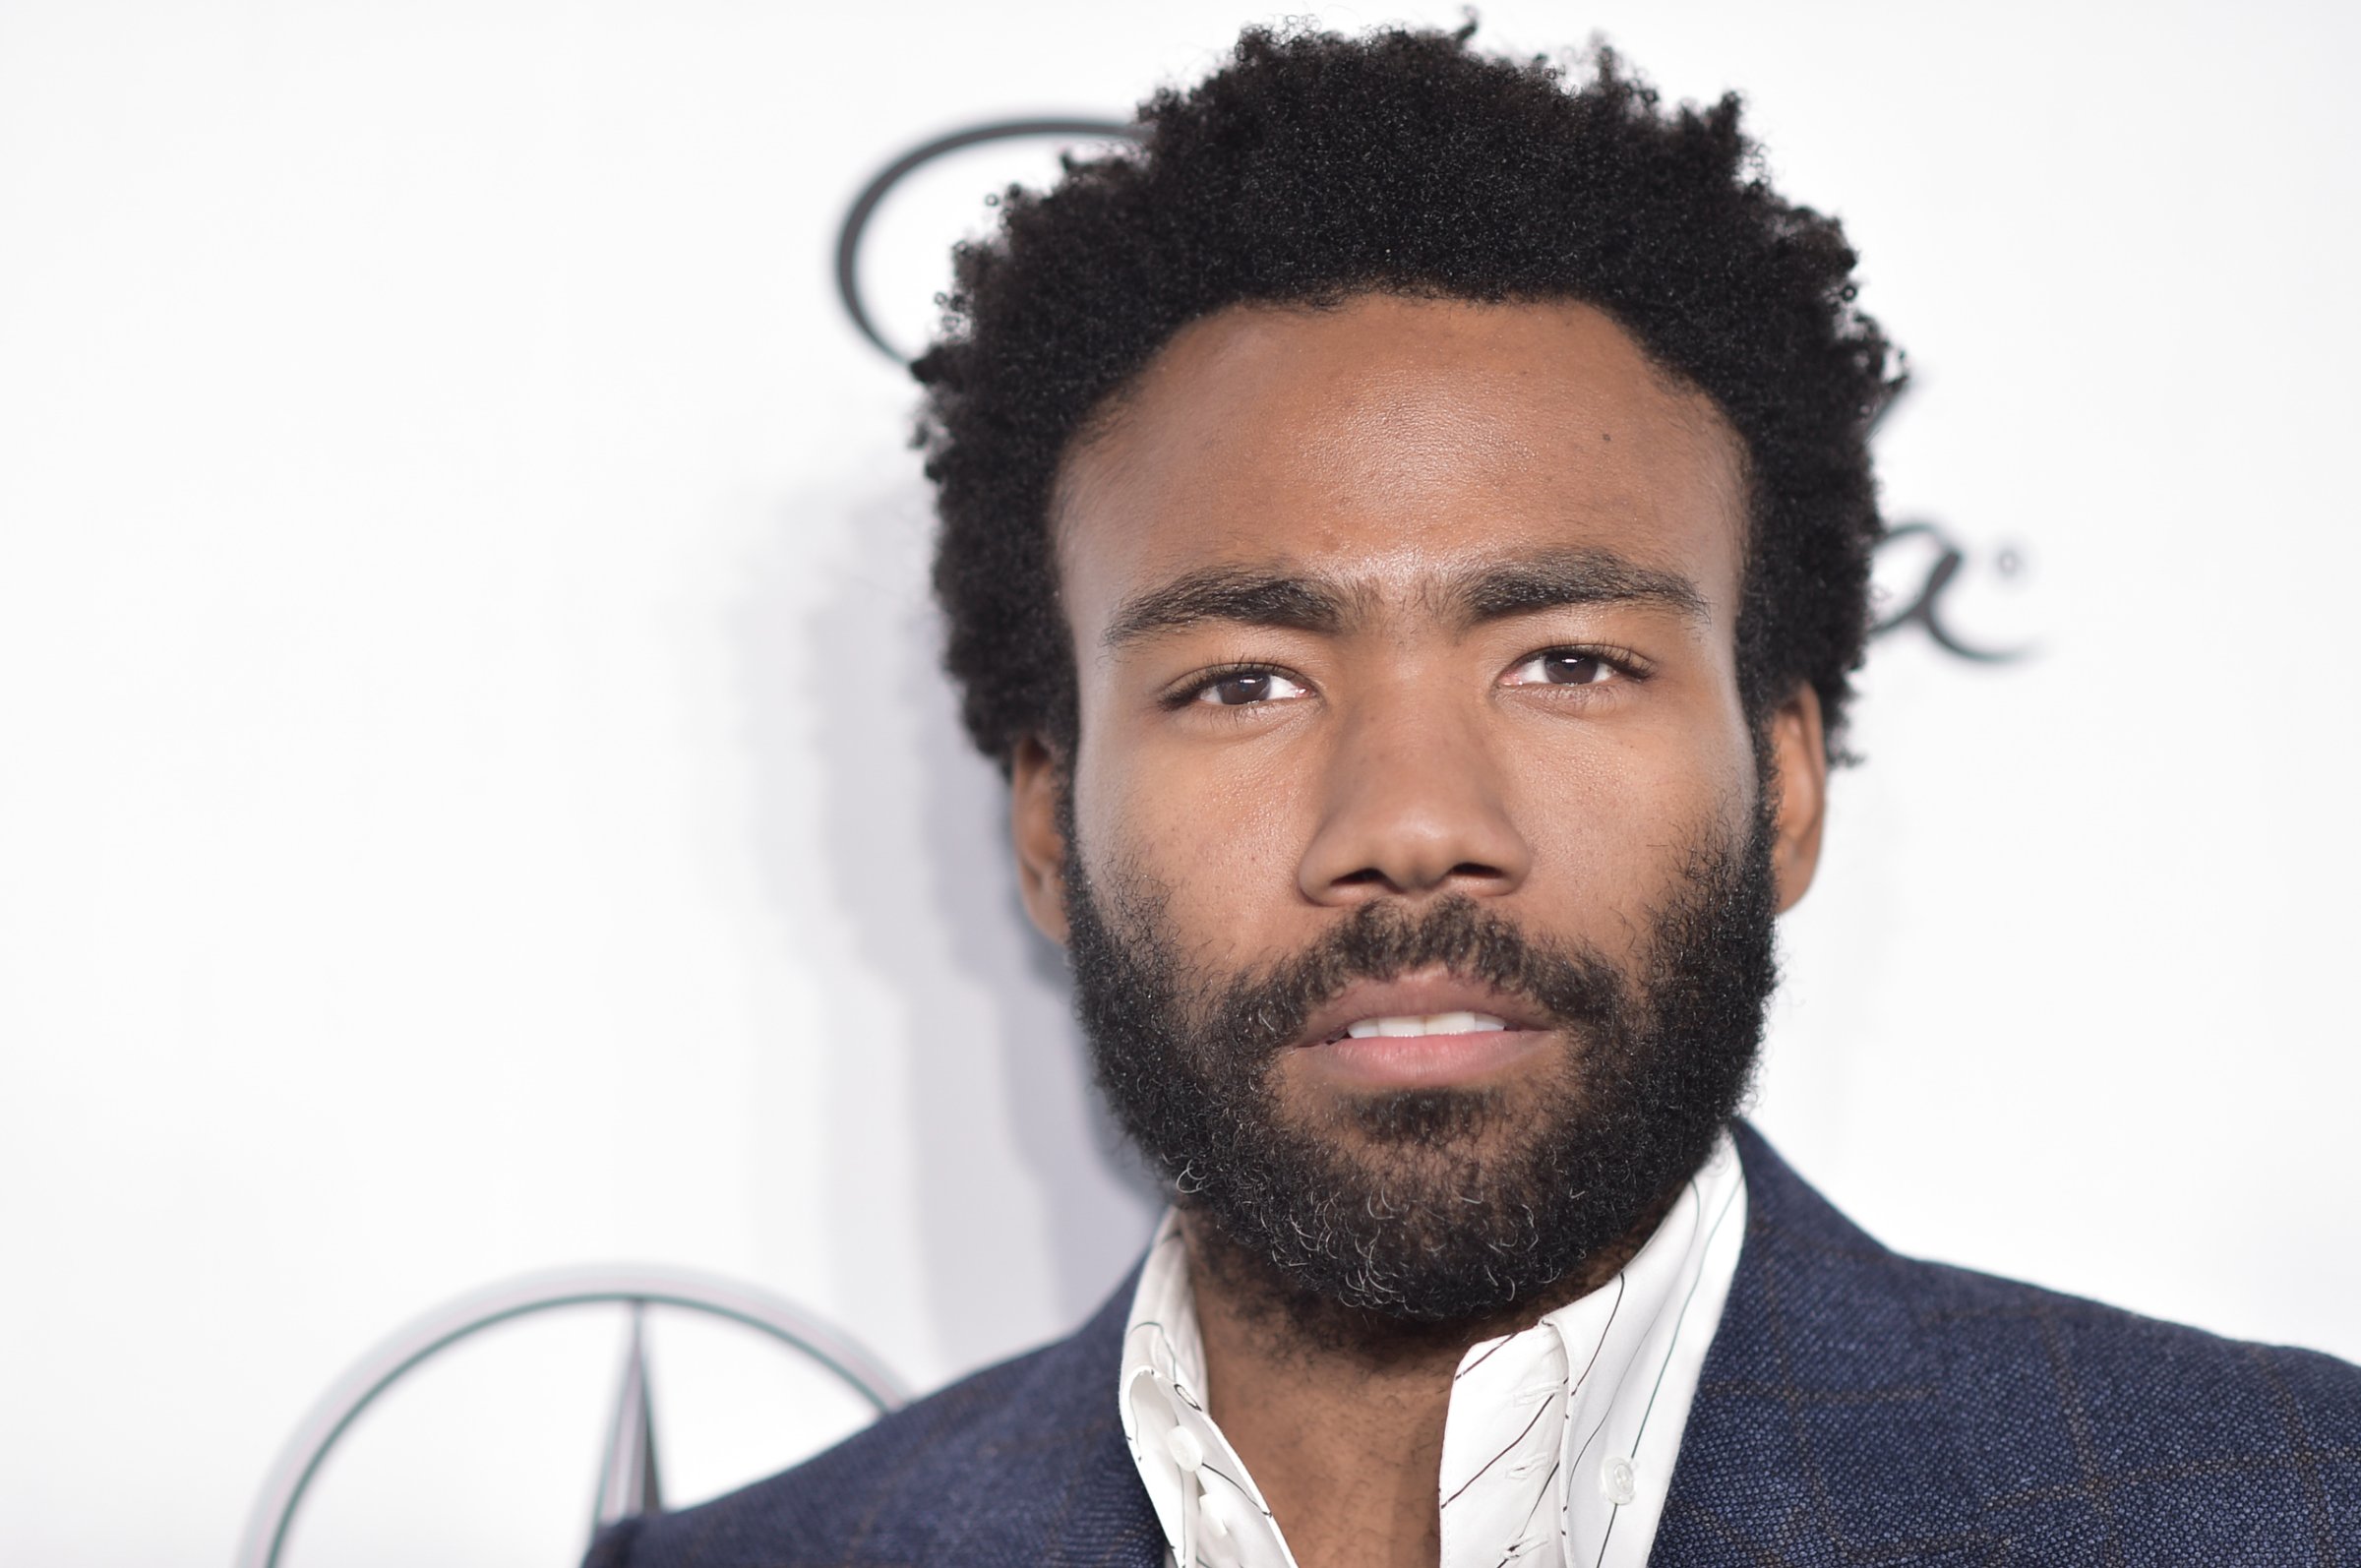 Donald Glover attends the Variety Magazine and Women in Film 2016 Television Nominees Celebration on Friday, Sept. 16, 2016, in West Hollywood, Calif. (Photo by Richard Shotwell/Invision/AP)